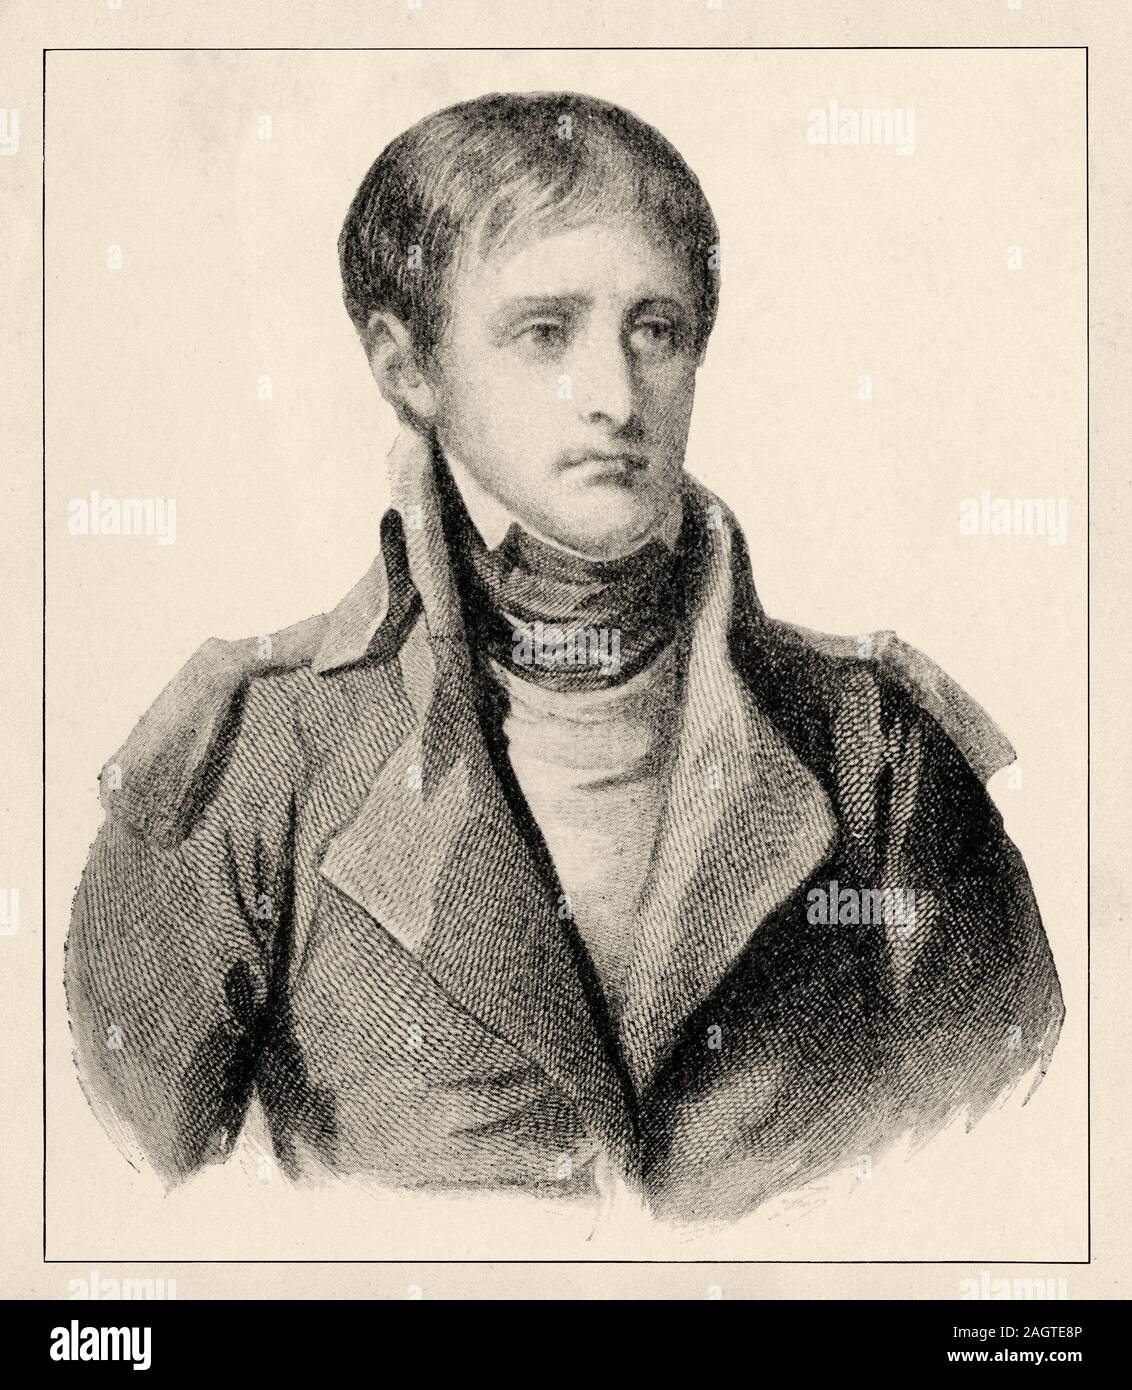 Portrait of Napoleon Bonaparte, artillery lieutenant. French Revolution 18th century. History of France, old engraved illustration image from the book Stock Photo